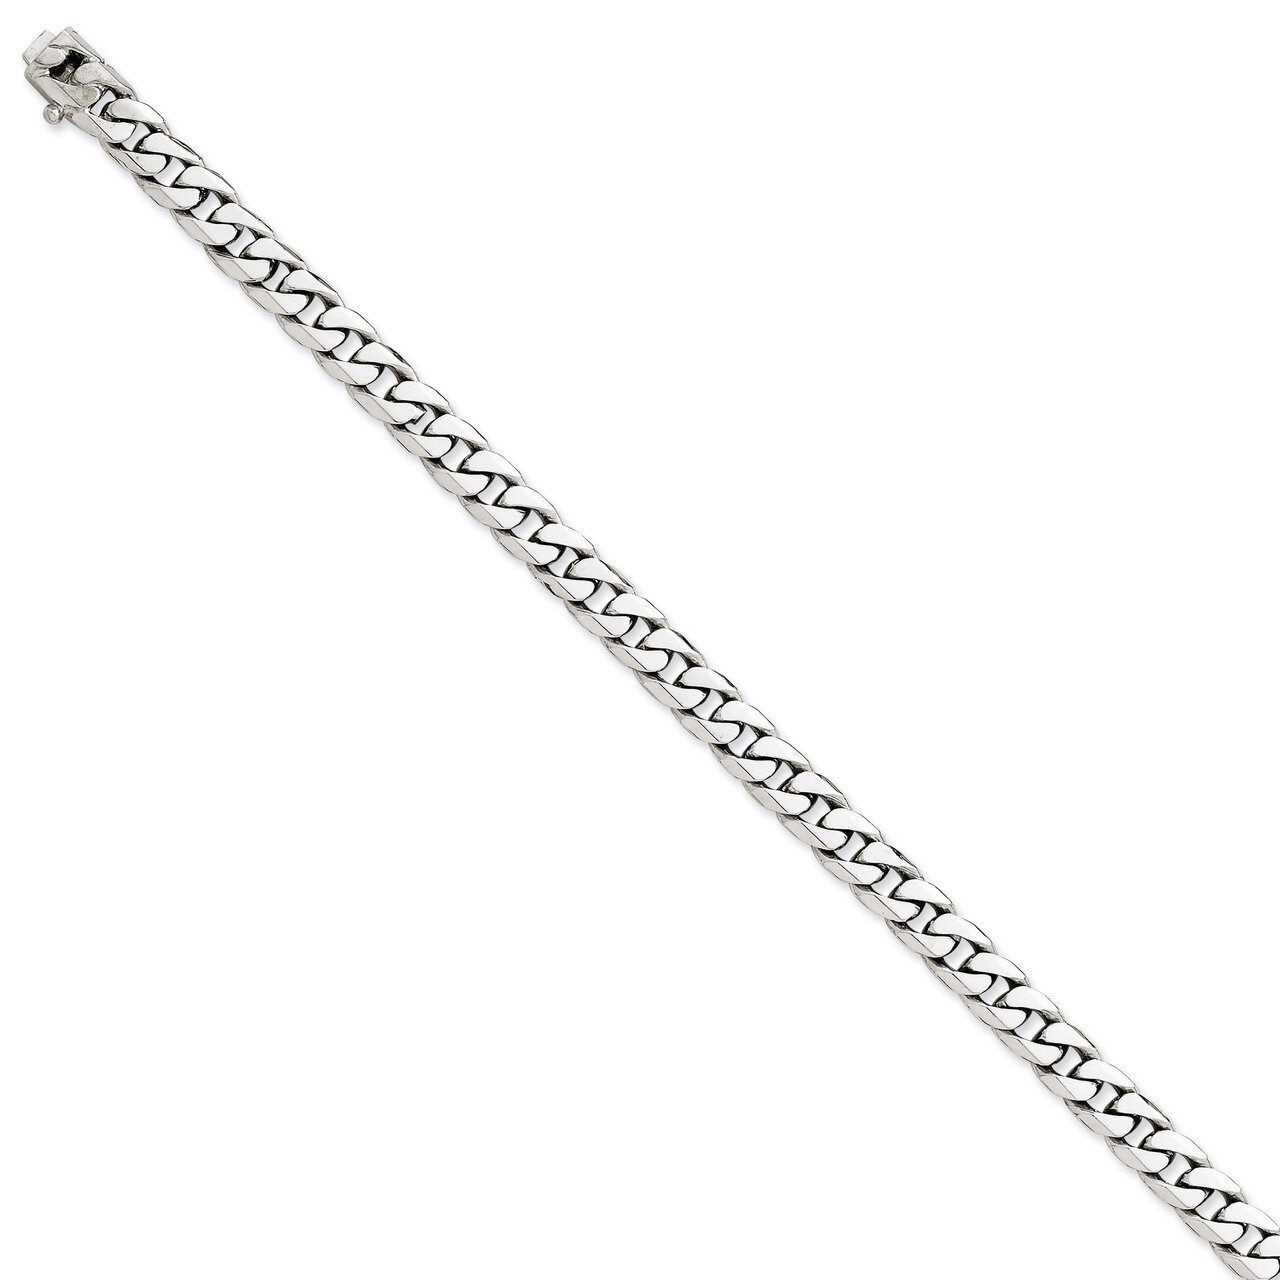 6mm Hand-Polished Curb Link Chain 9 Inch 14k White Gold WLK131-9